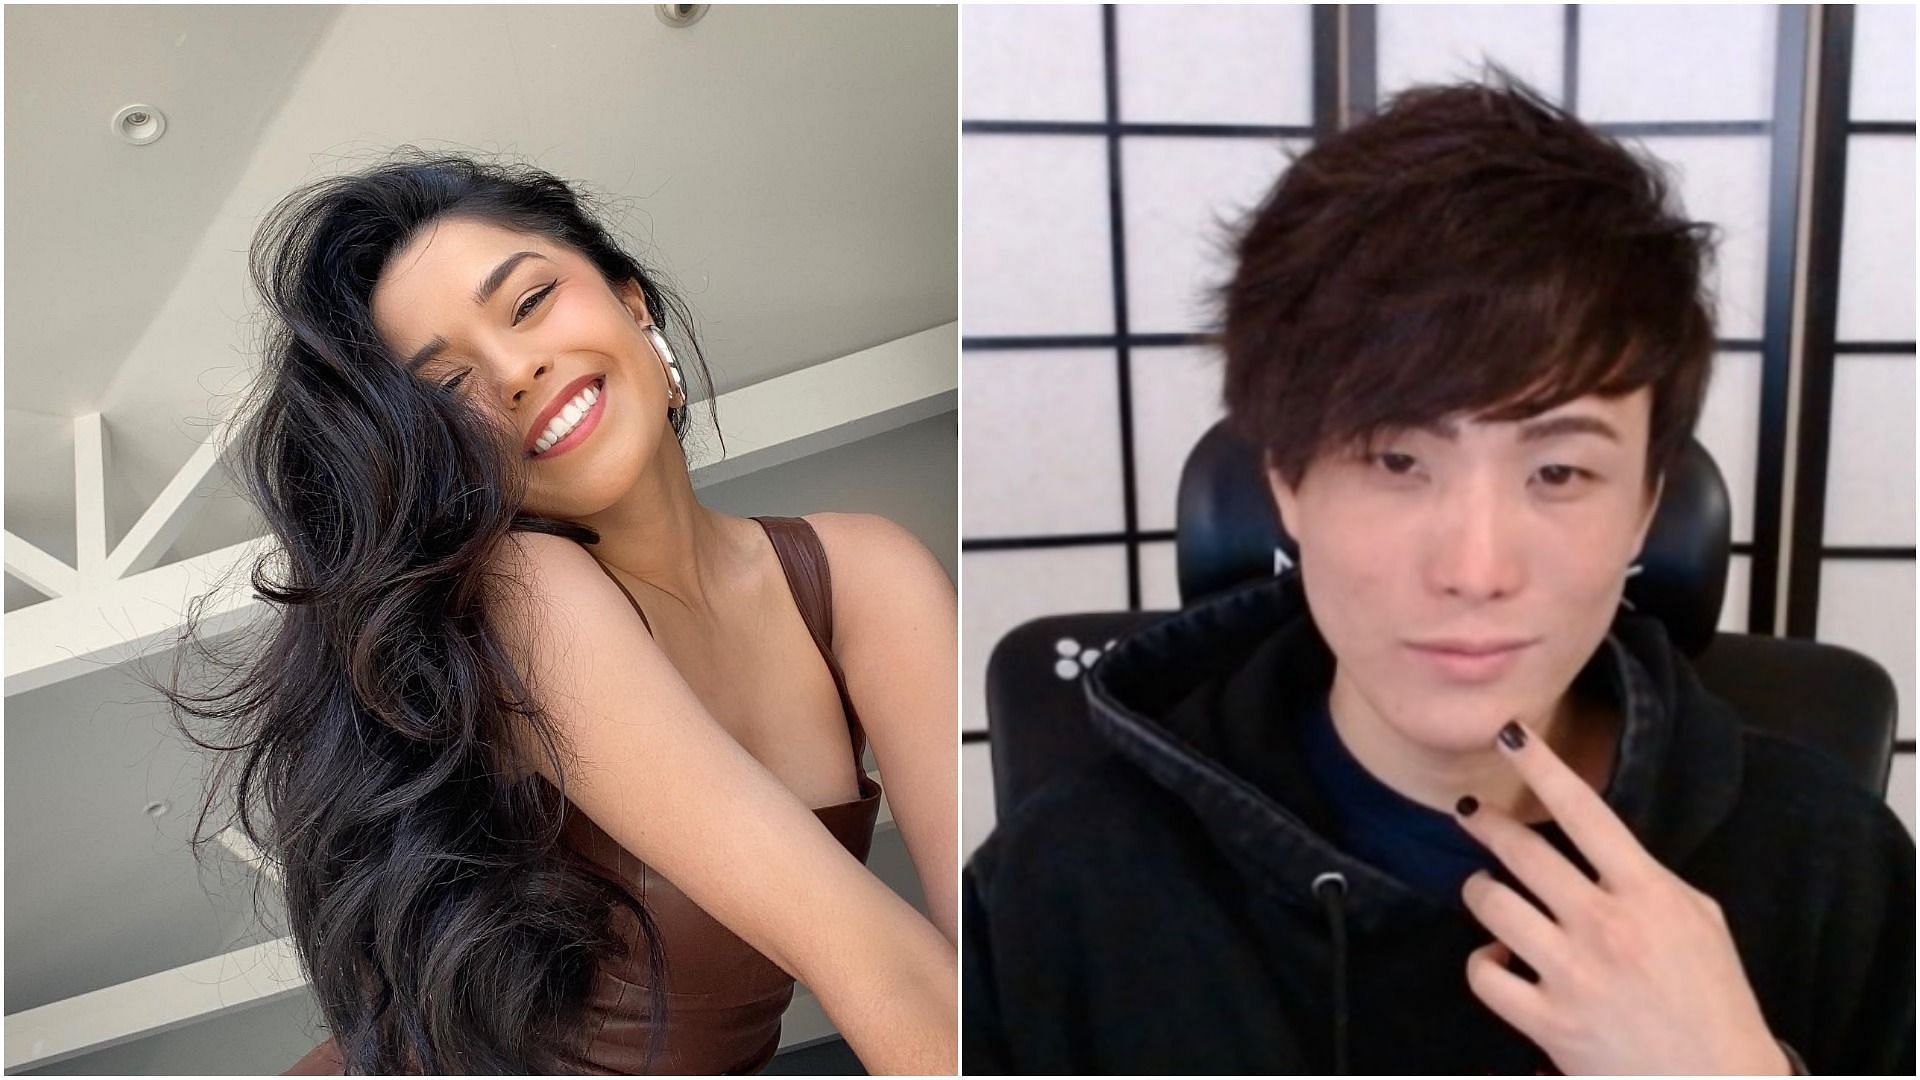 Valkyrae sheds light on relationship with Sykkuno